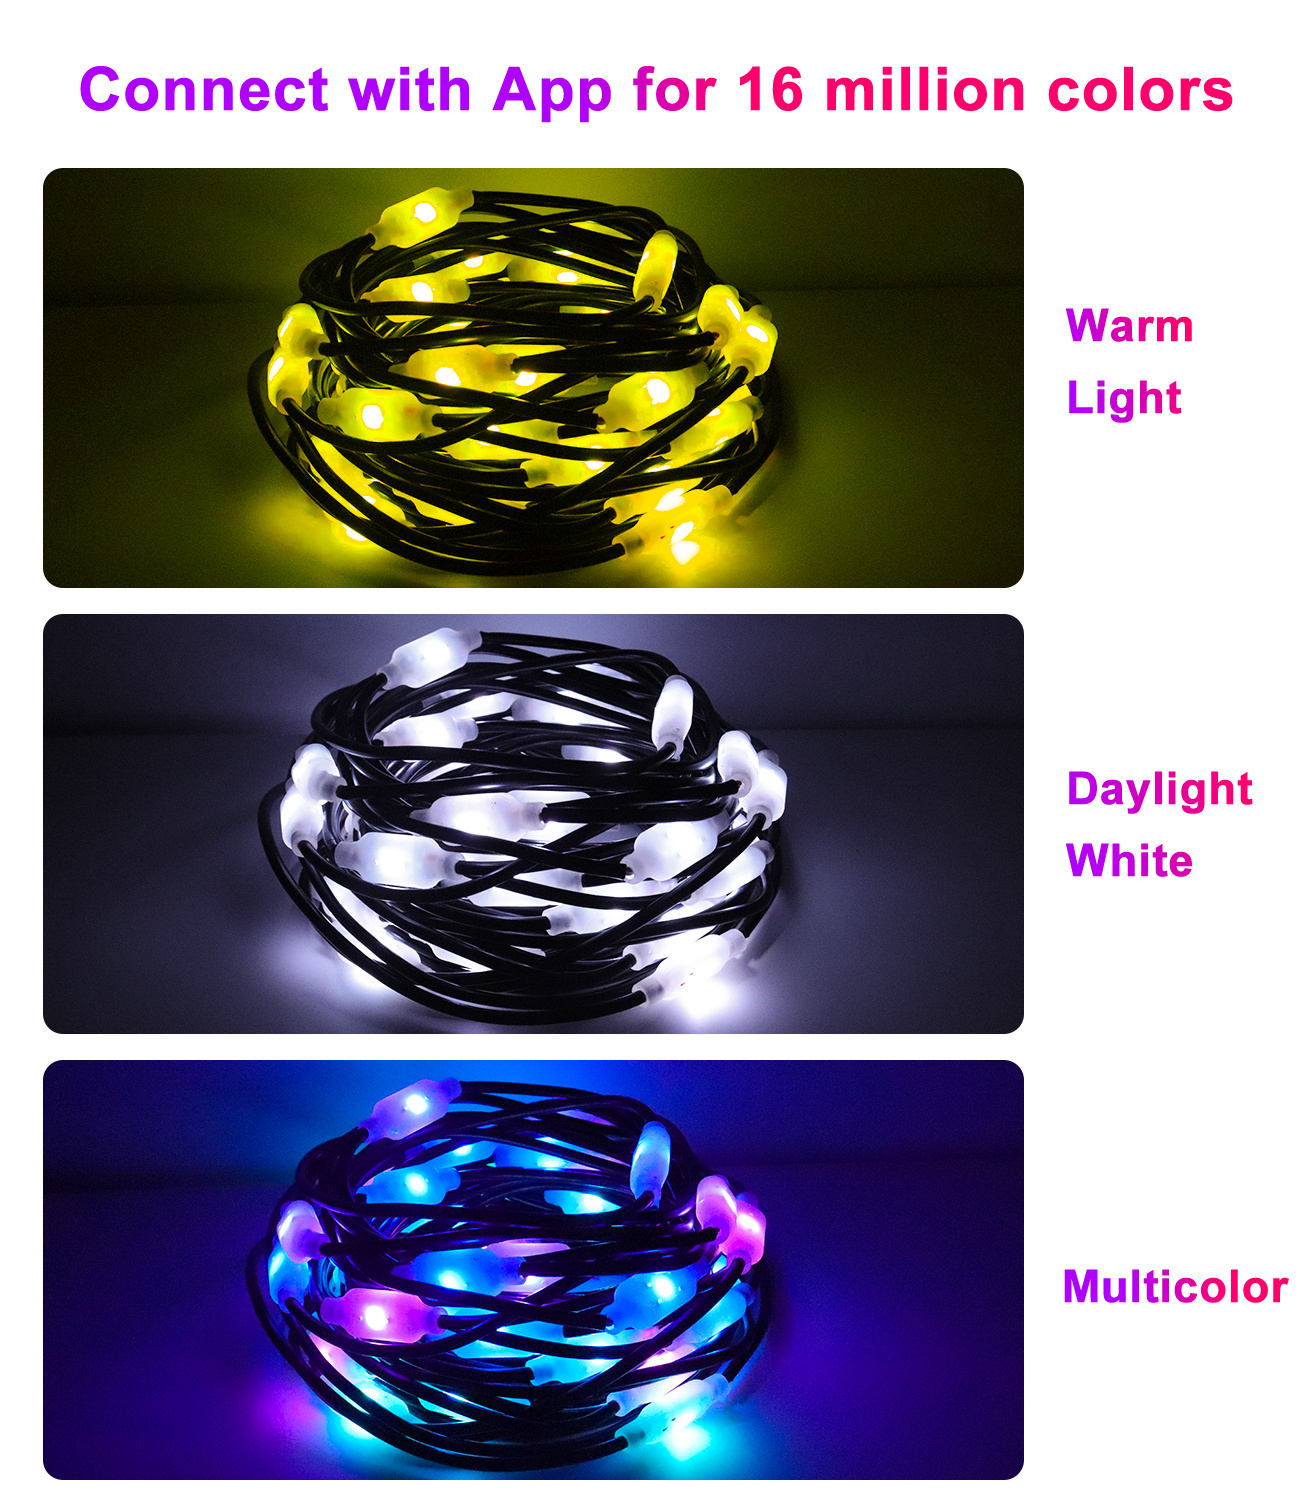 41ft Smart Outdoor String Lights, APP Control, Music Sync Color Changing Camping Light Strings, with DIY and Multi Scene Modes,Waterproof USB String Lights for Camping & Tents